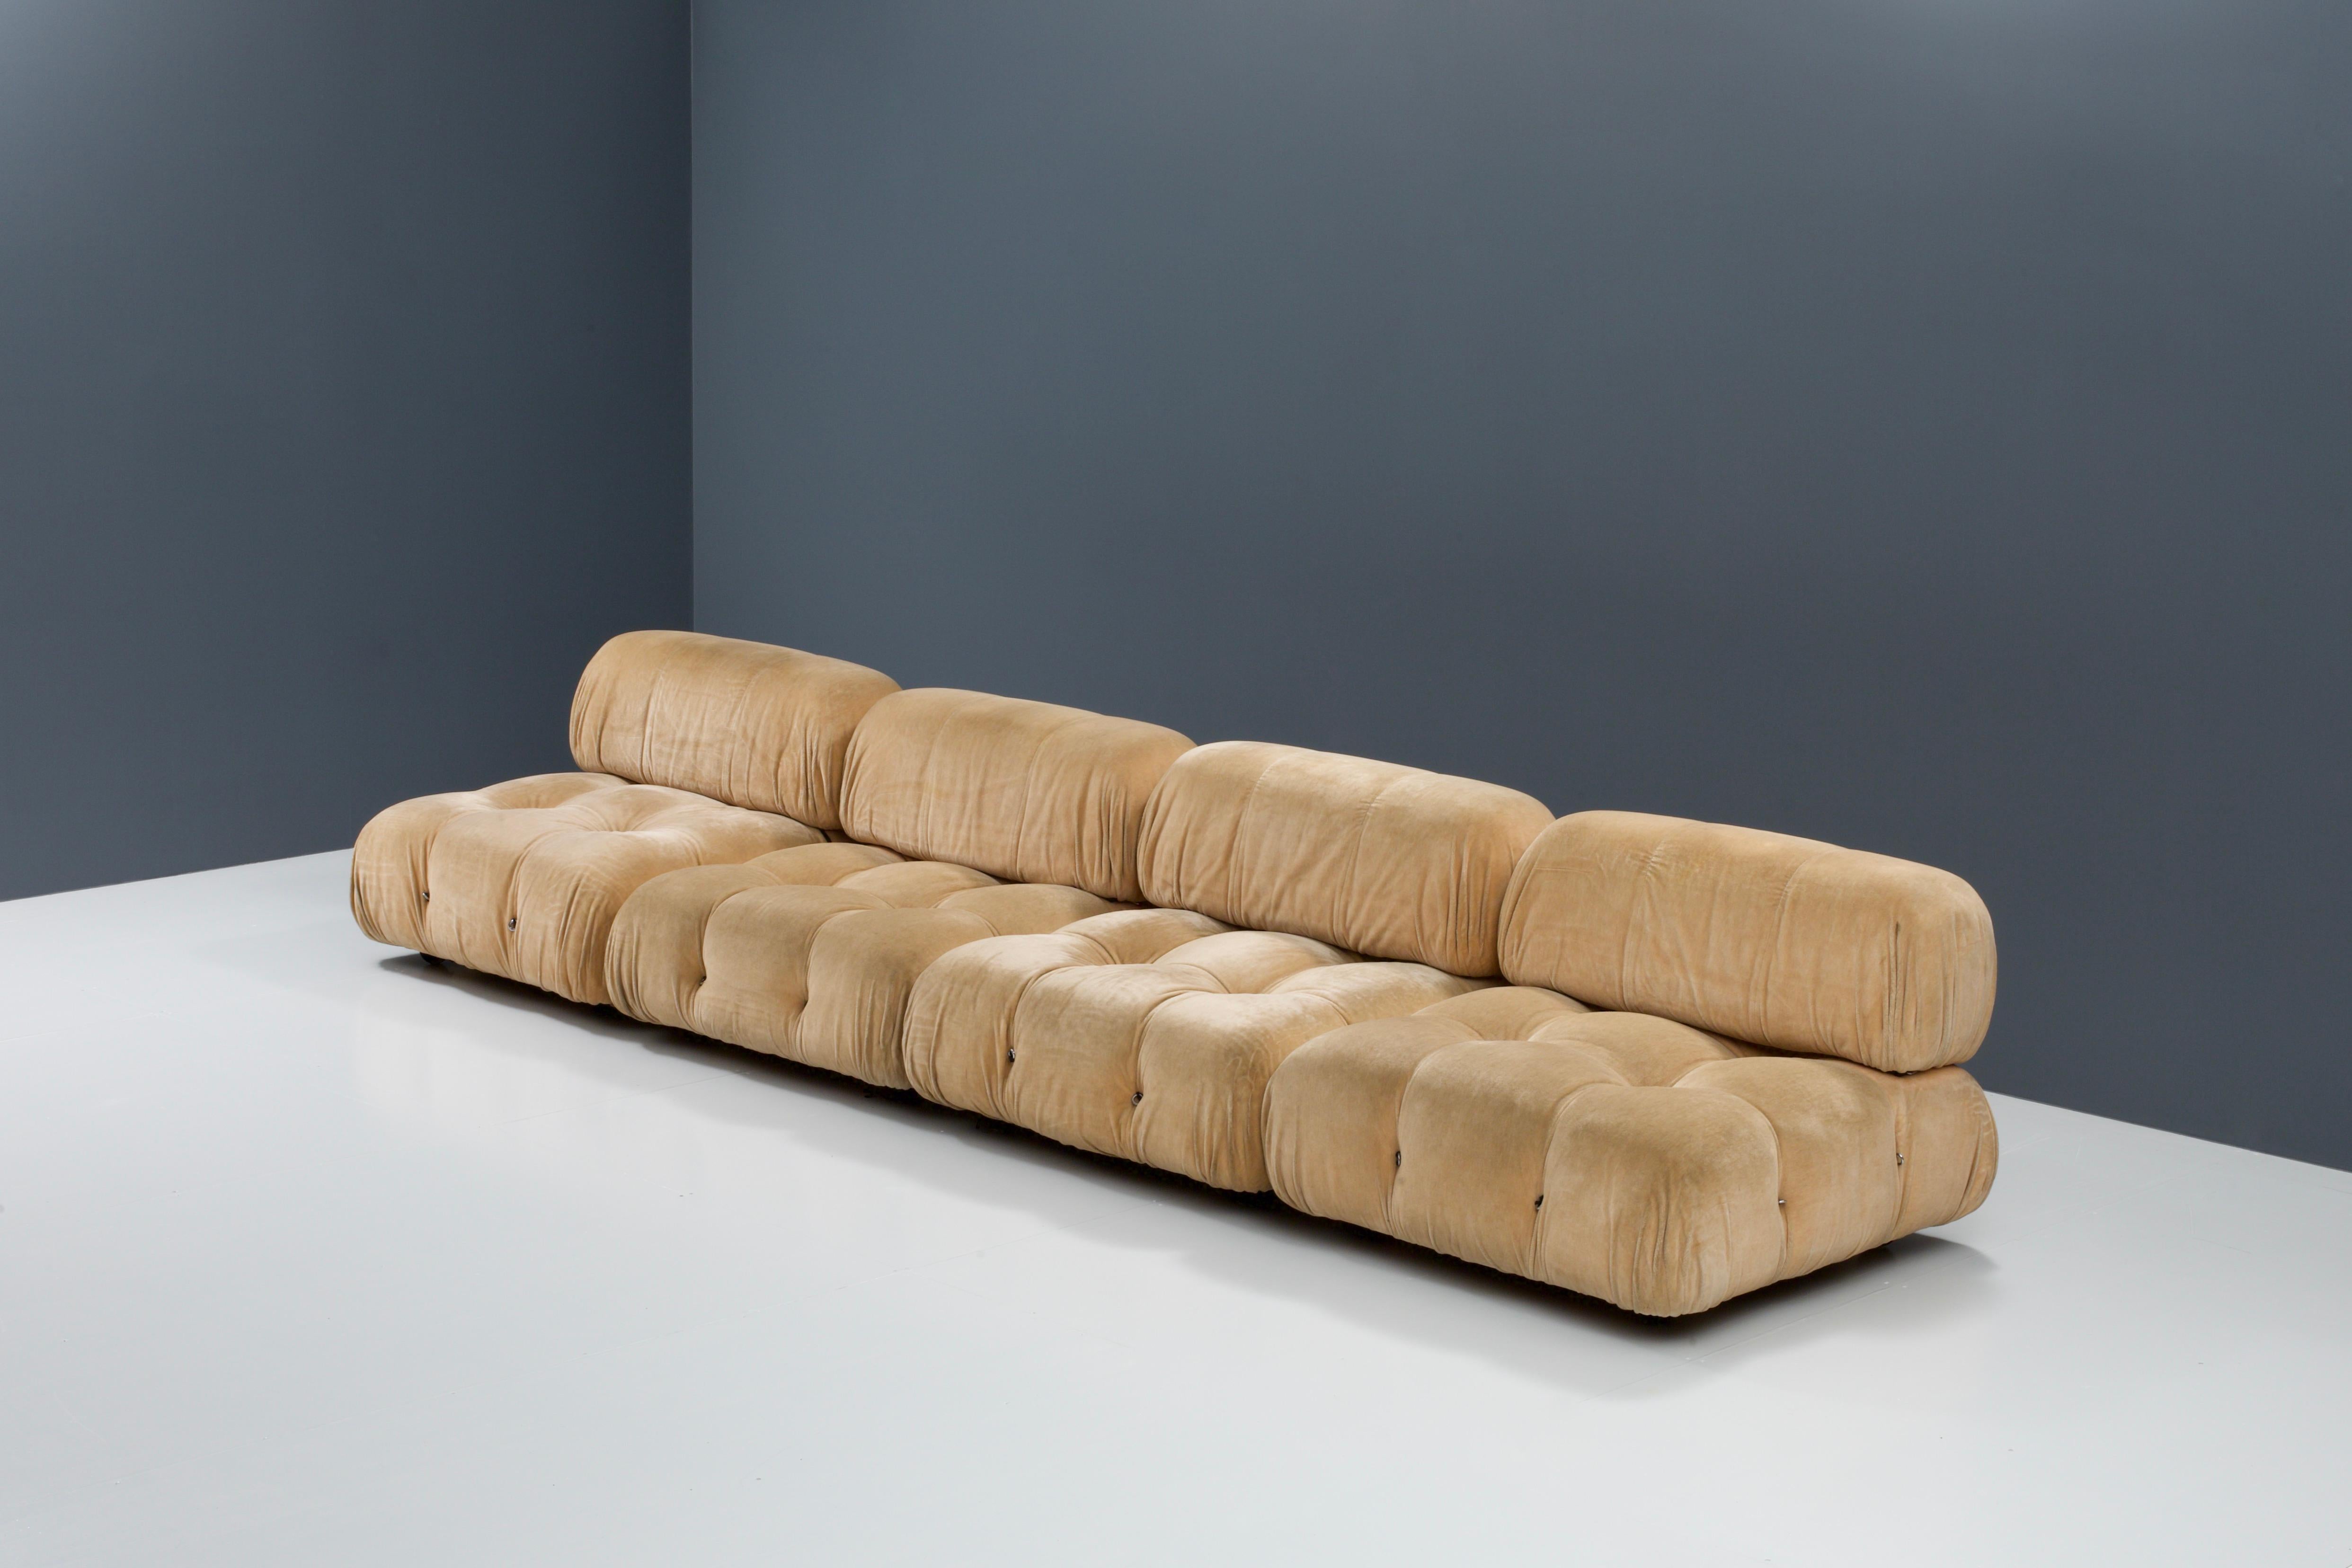 Four large Camaleonda modules with backrest by Mario Bellini for B&B Italia in original velvet Champagne colored upholstery, 1970s

The sofa is very comfortable and the fact that this wonderful piece is modular, provides endless flexible solutions